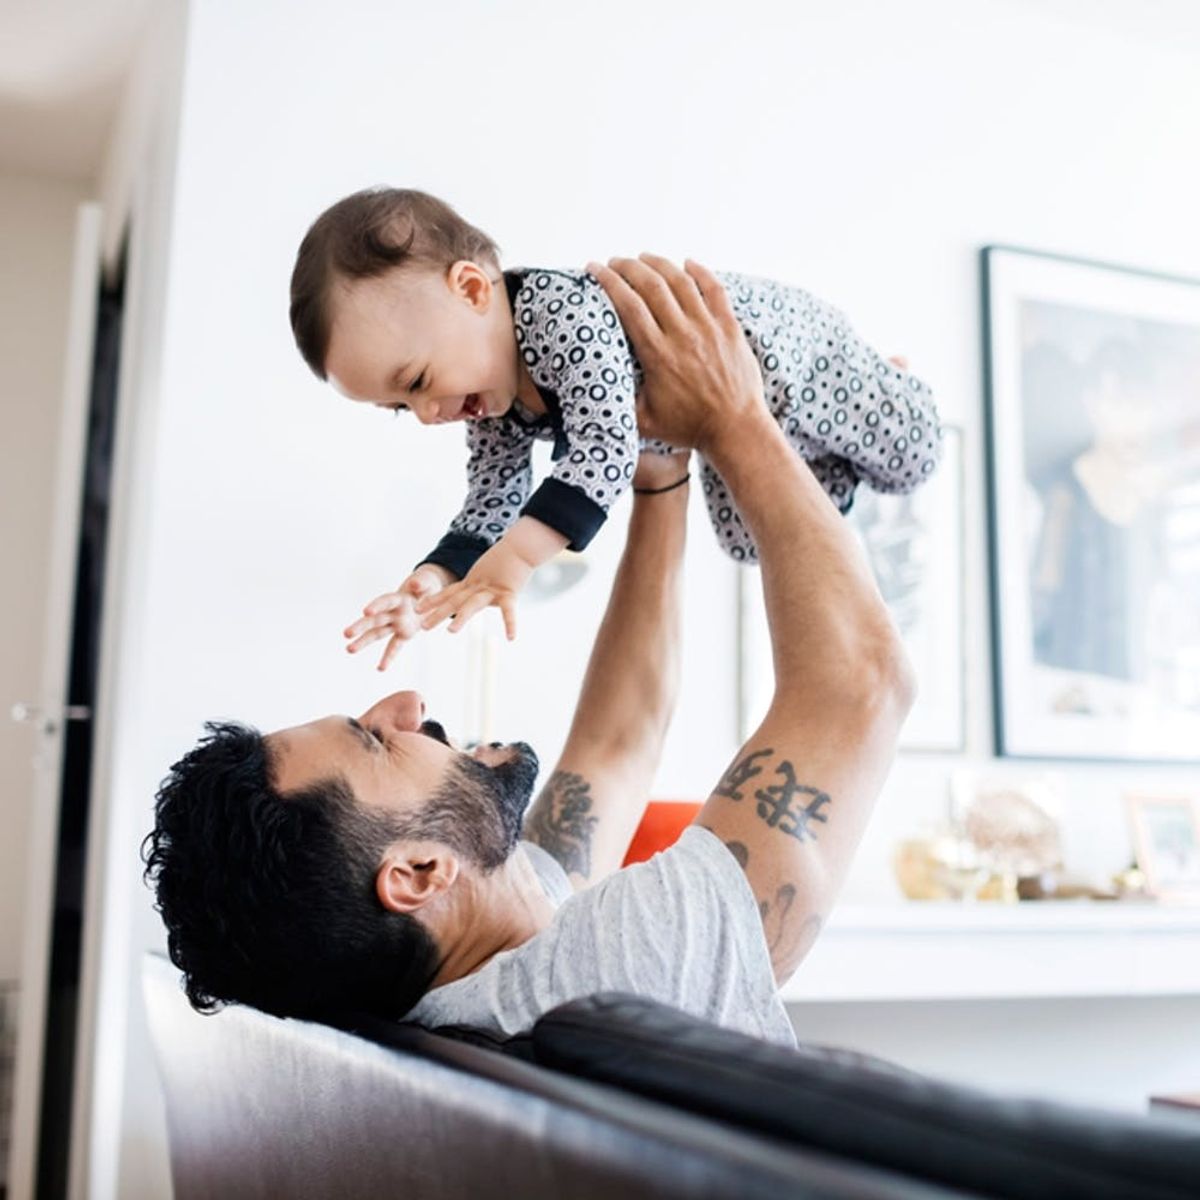 6 Reasons Why Your Family Should Have a Stay-at-Home Dad